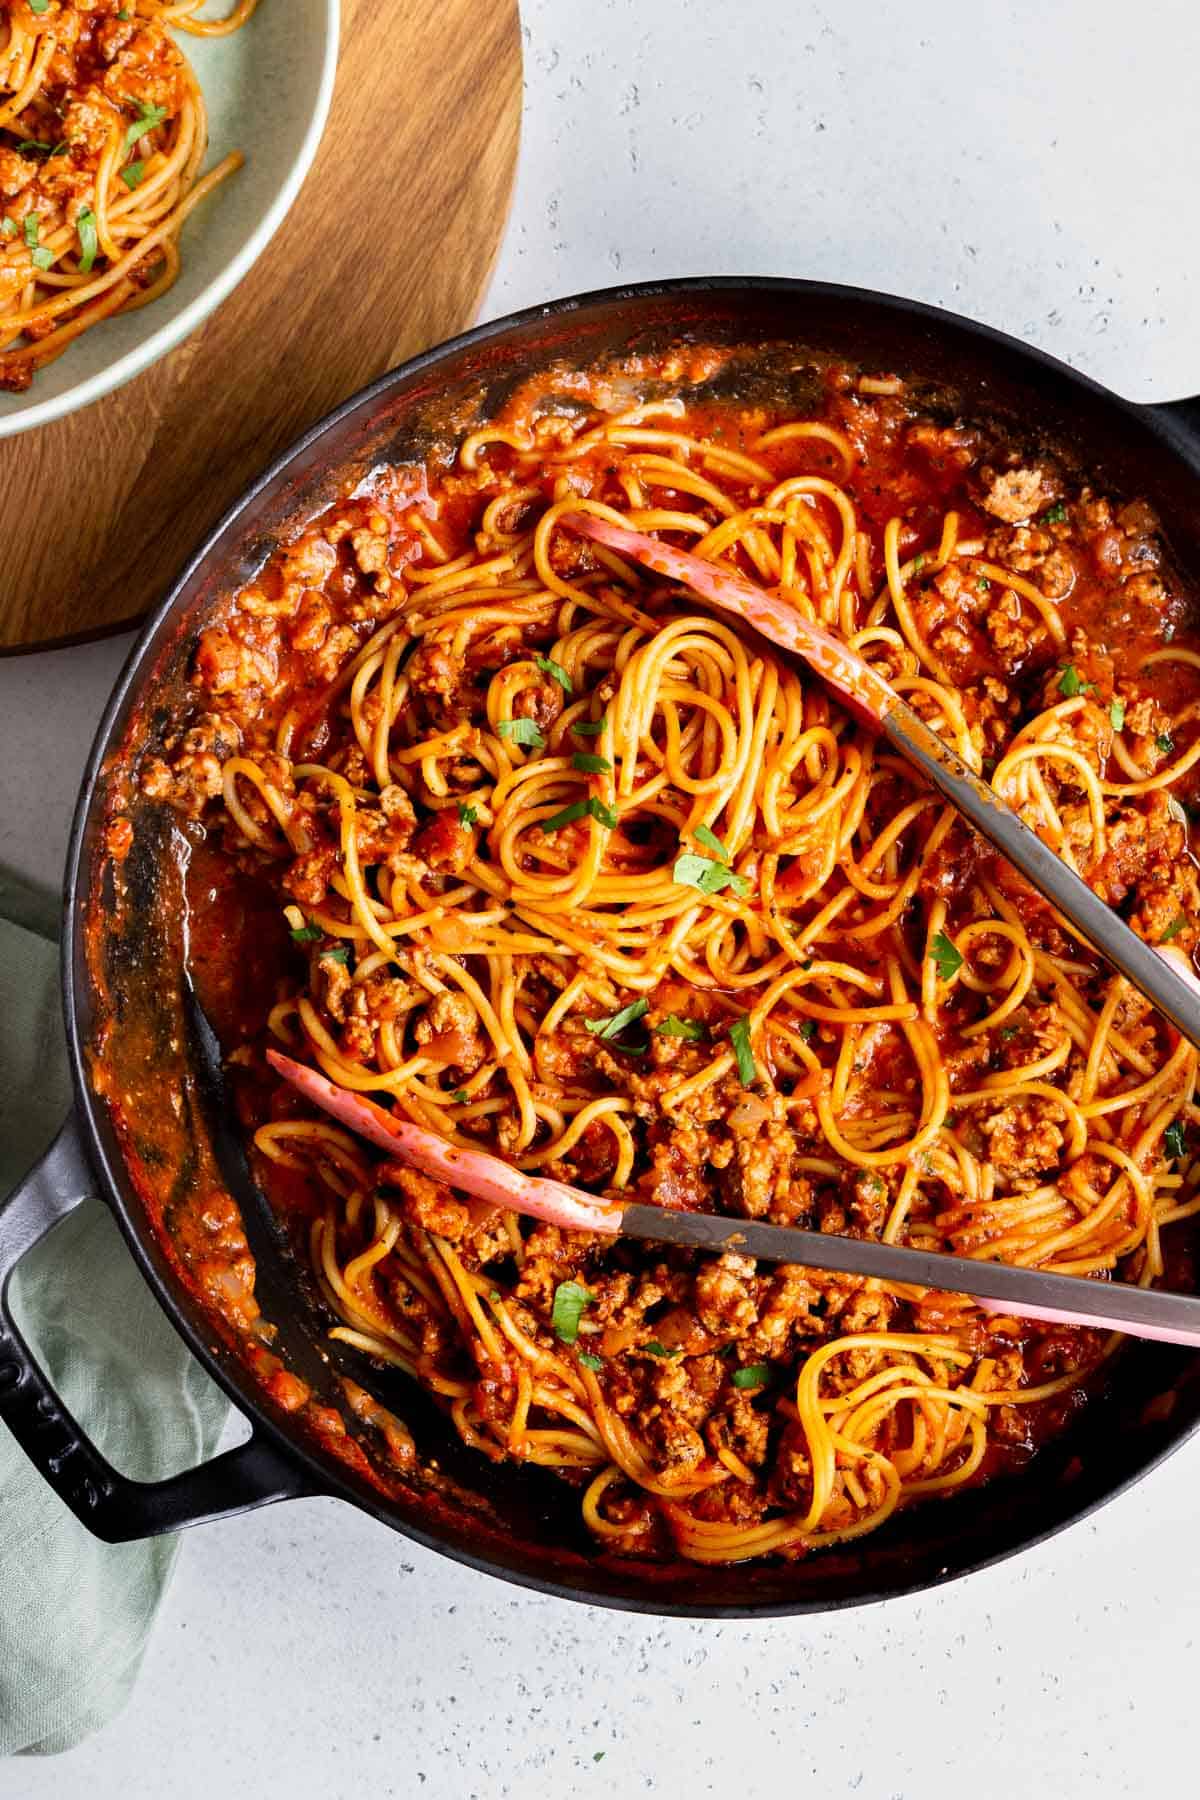 A skillet of turkey spaghetti with tongs.